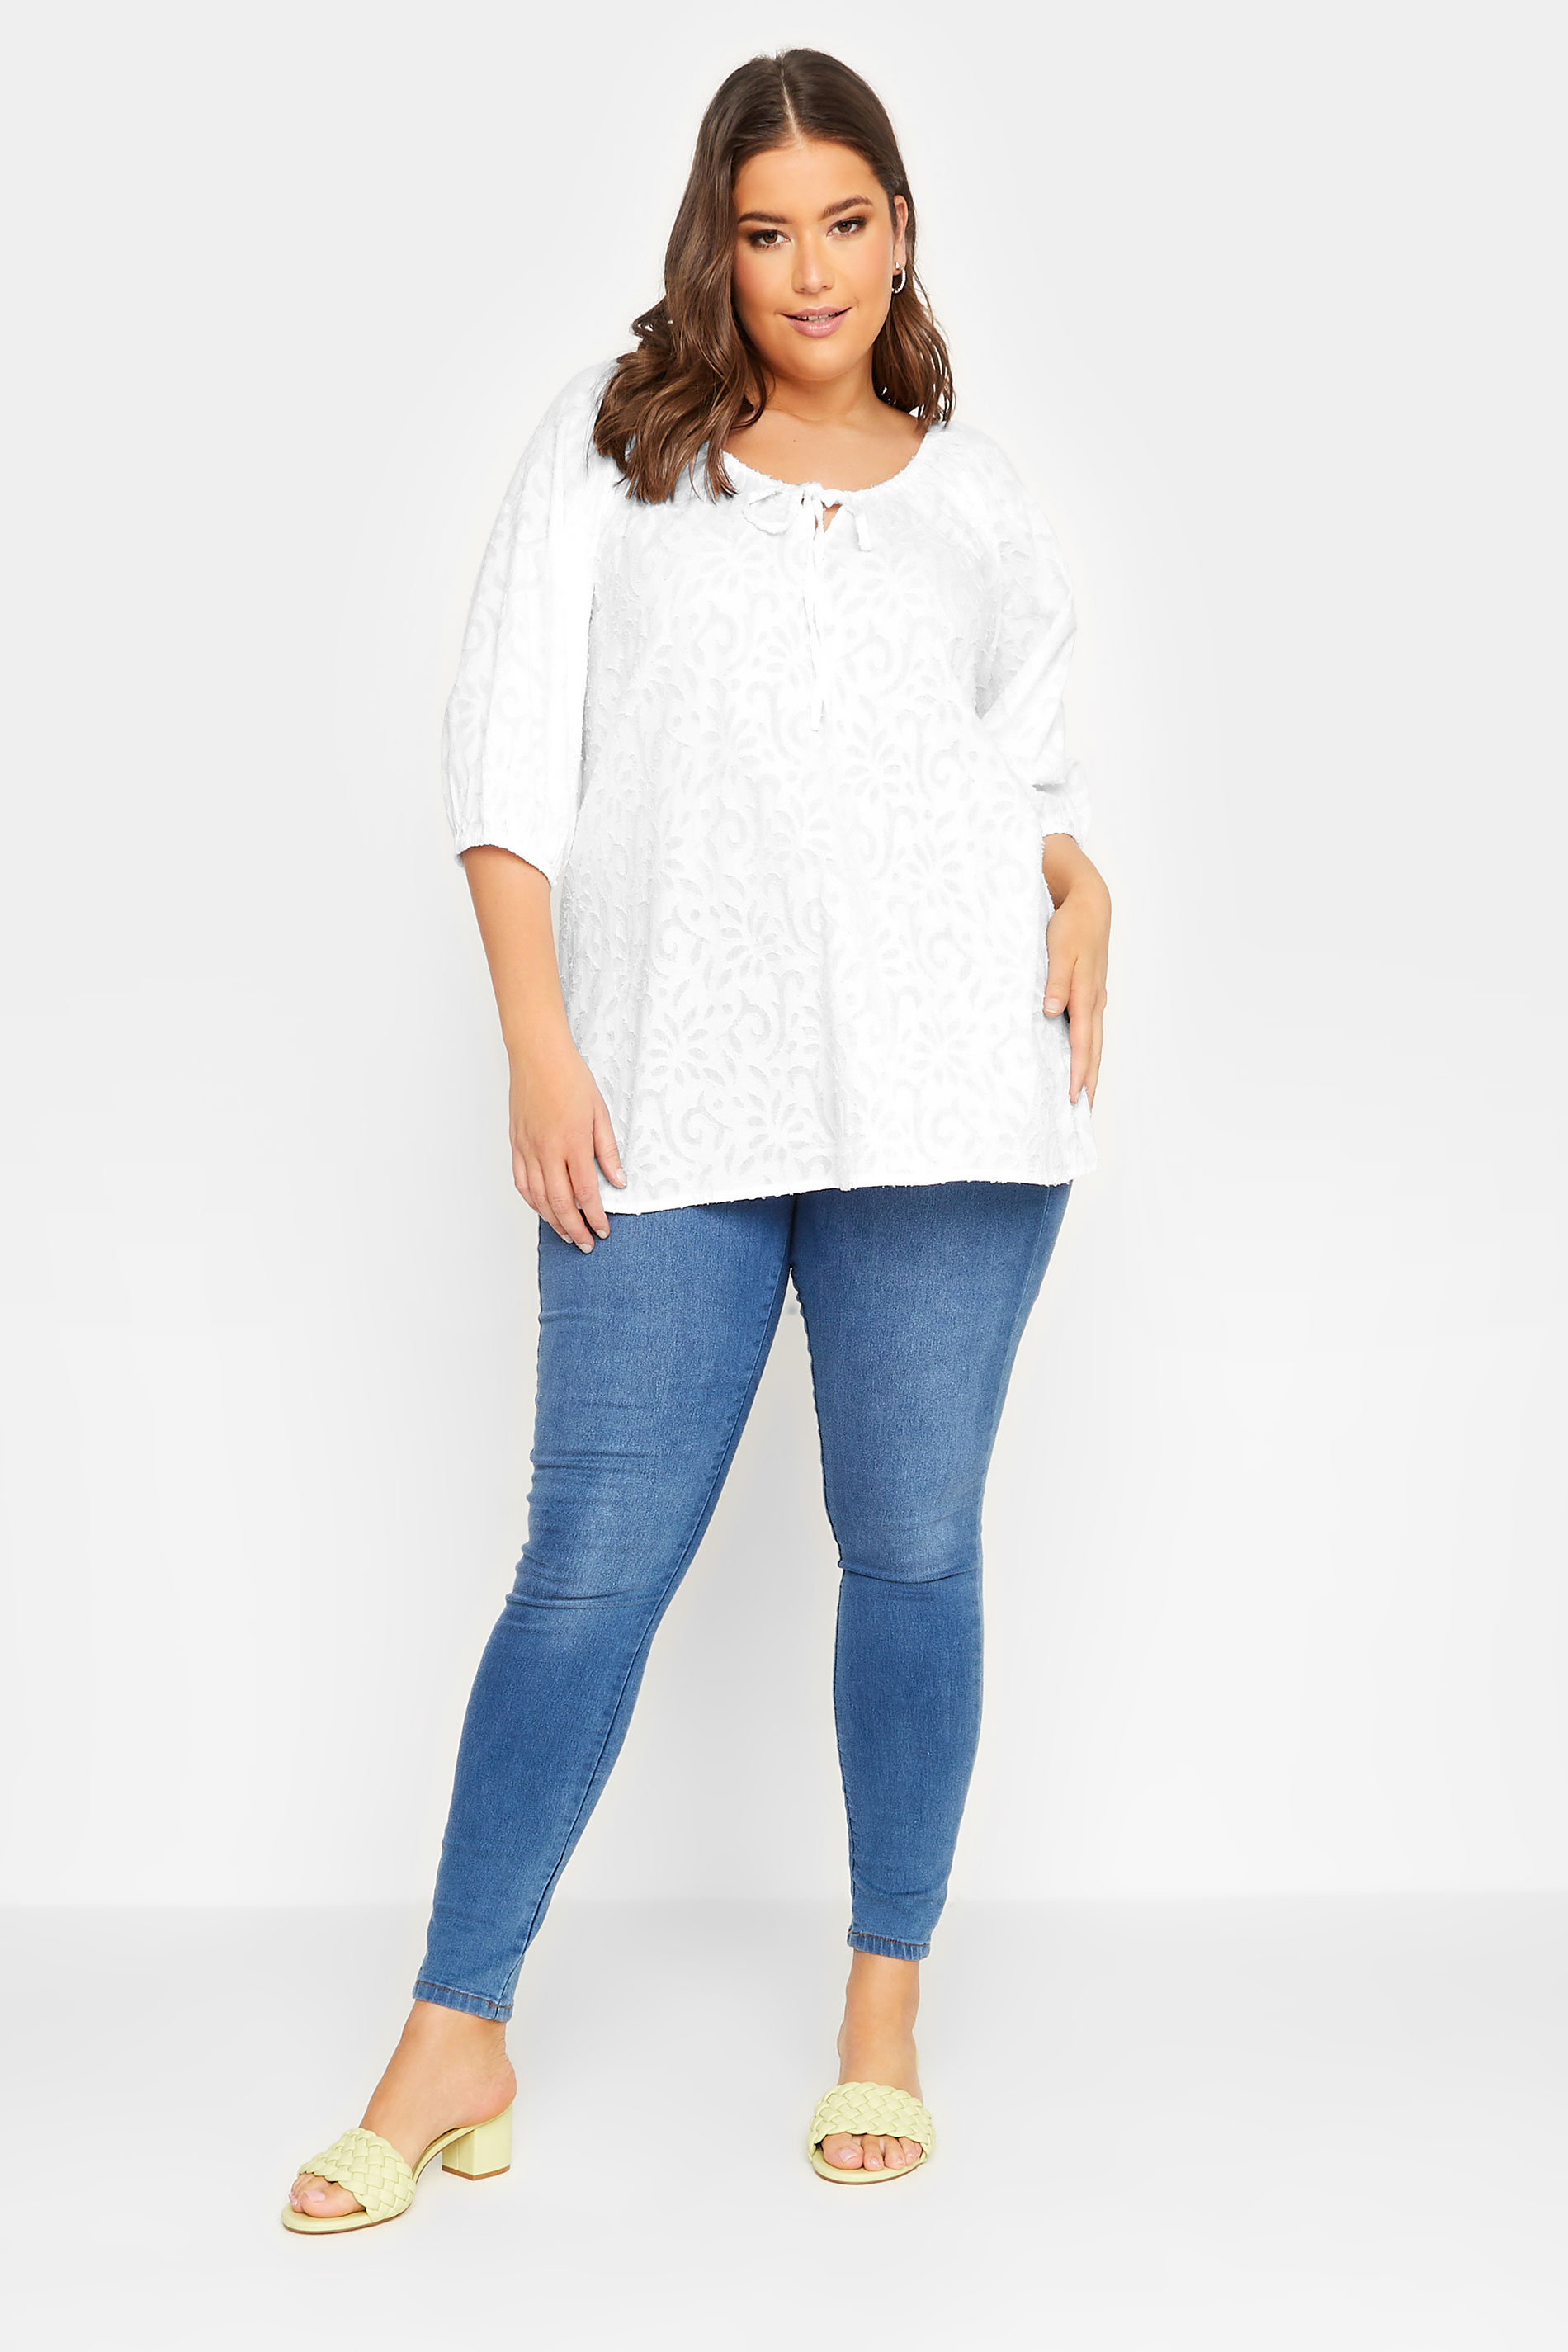 YOURS Plus Size White Textured Tie Neck Top | Yours Clothing 2